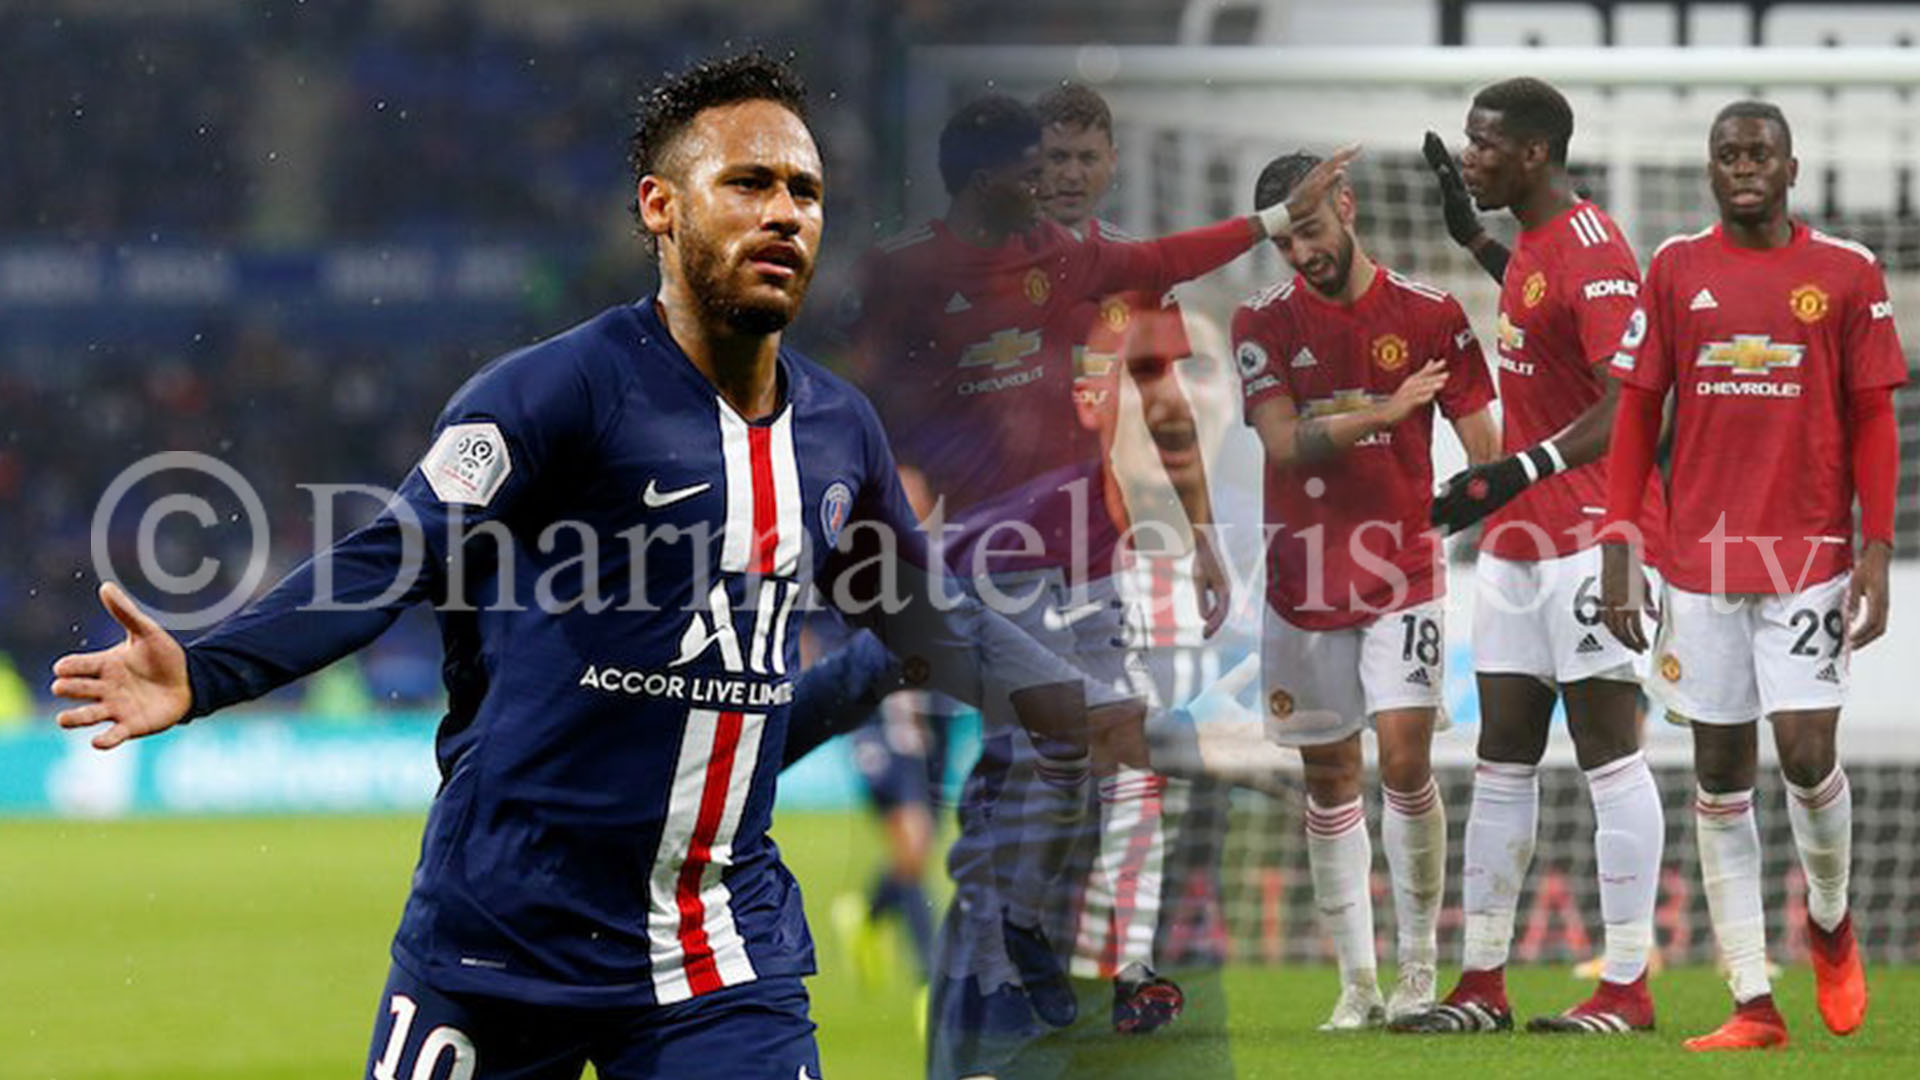 Man Utd starts Champions League with a victory against PSG